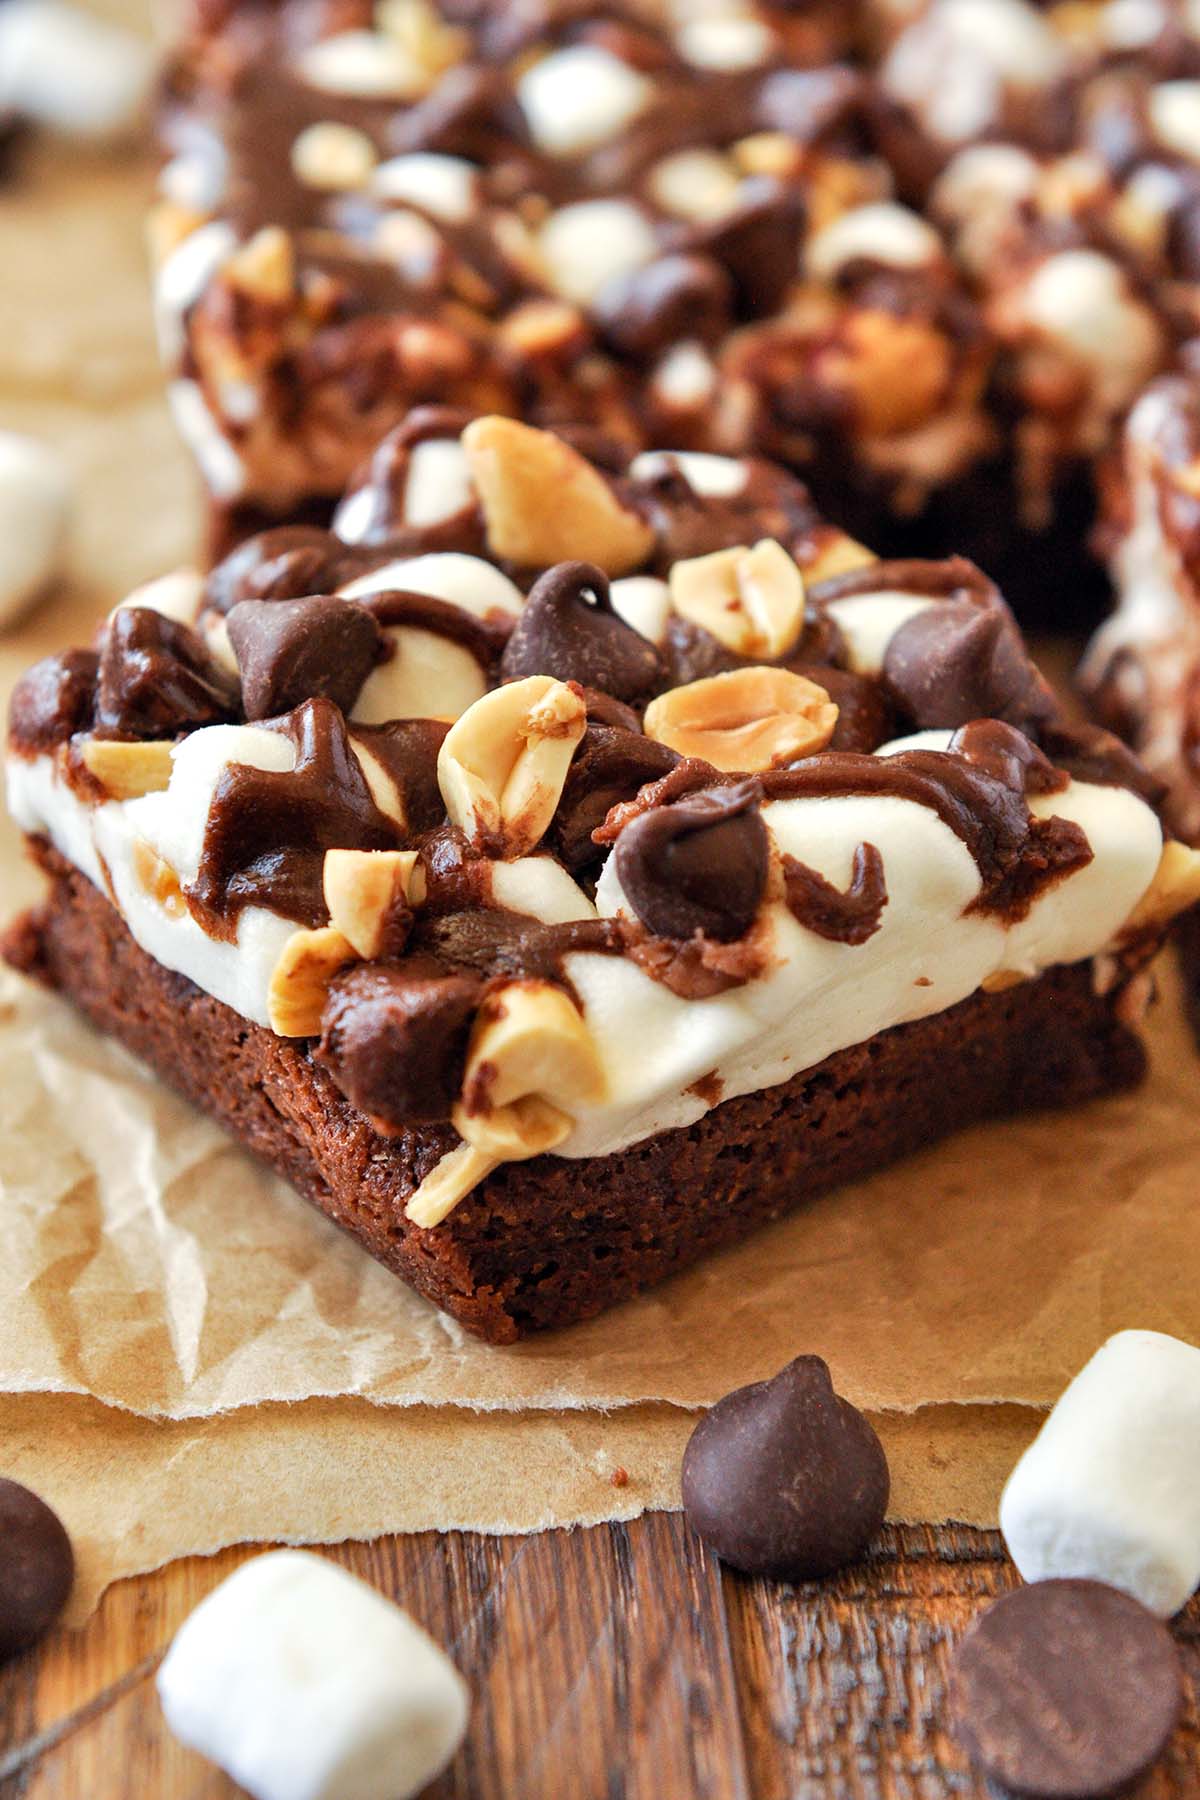 A close up of a rocky road brownie with more brownies in the background and marshmallows and chocolate chips in the foreground.